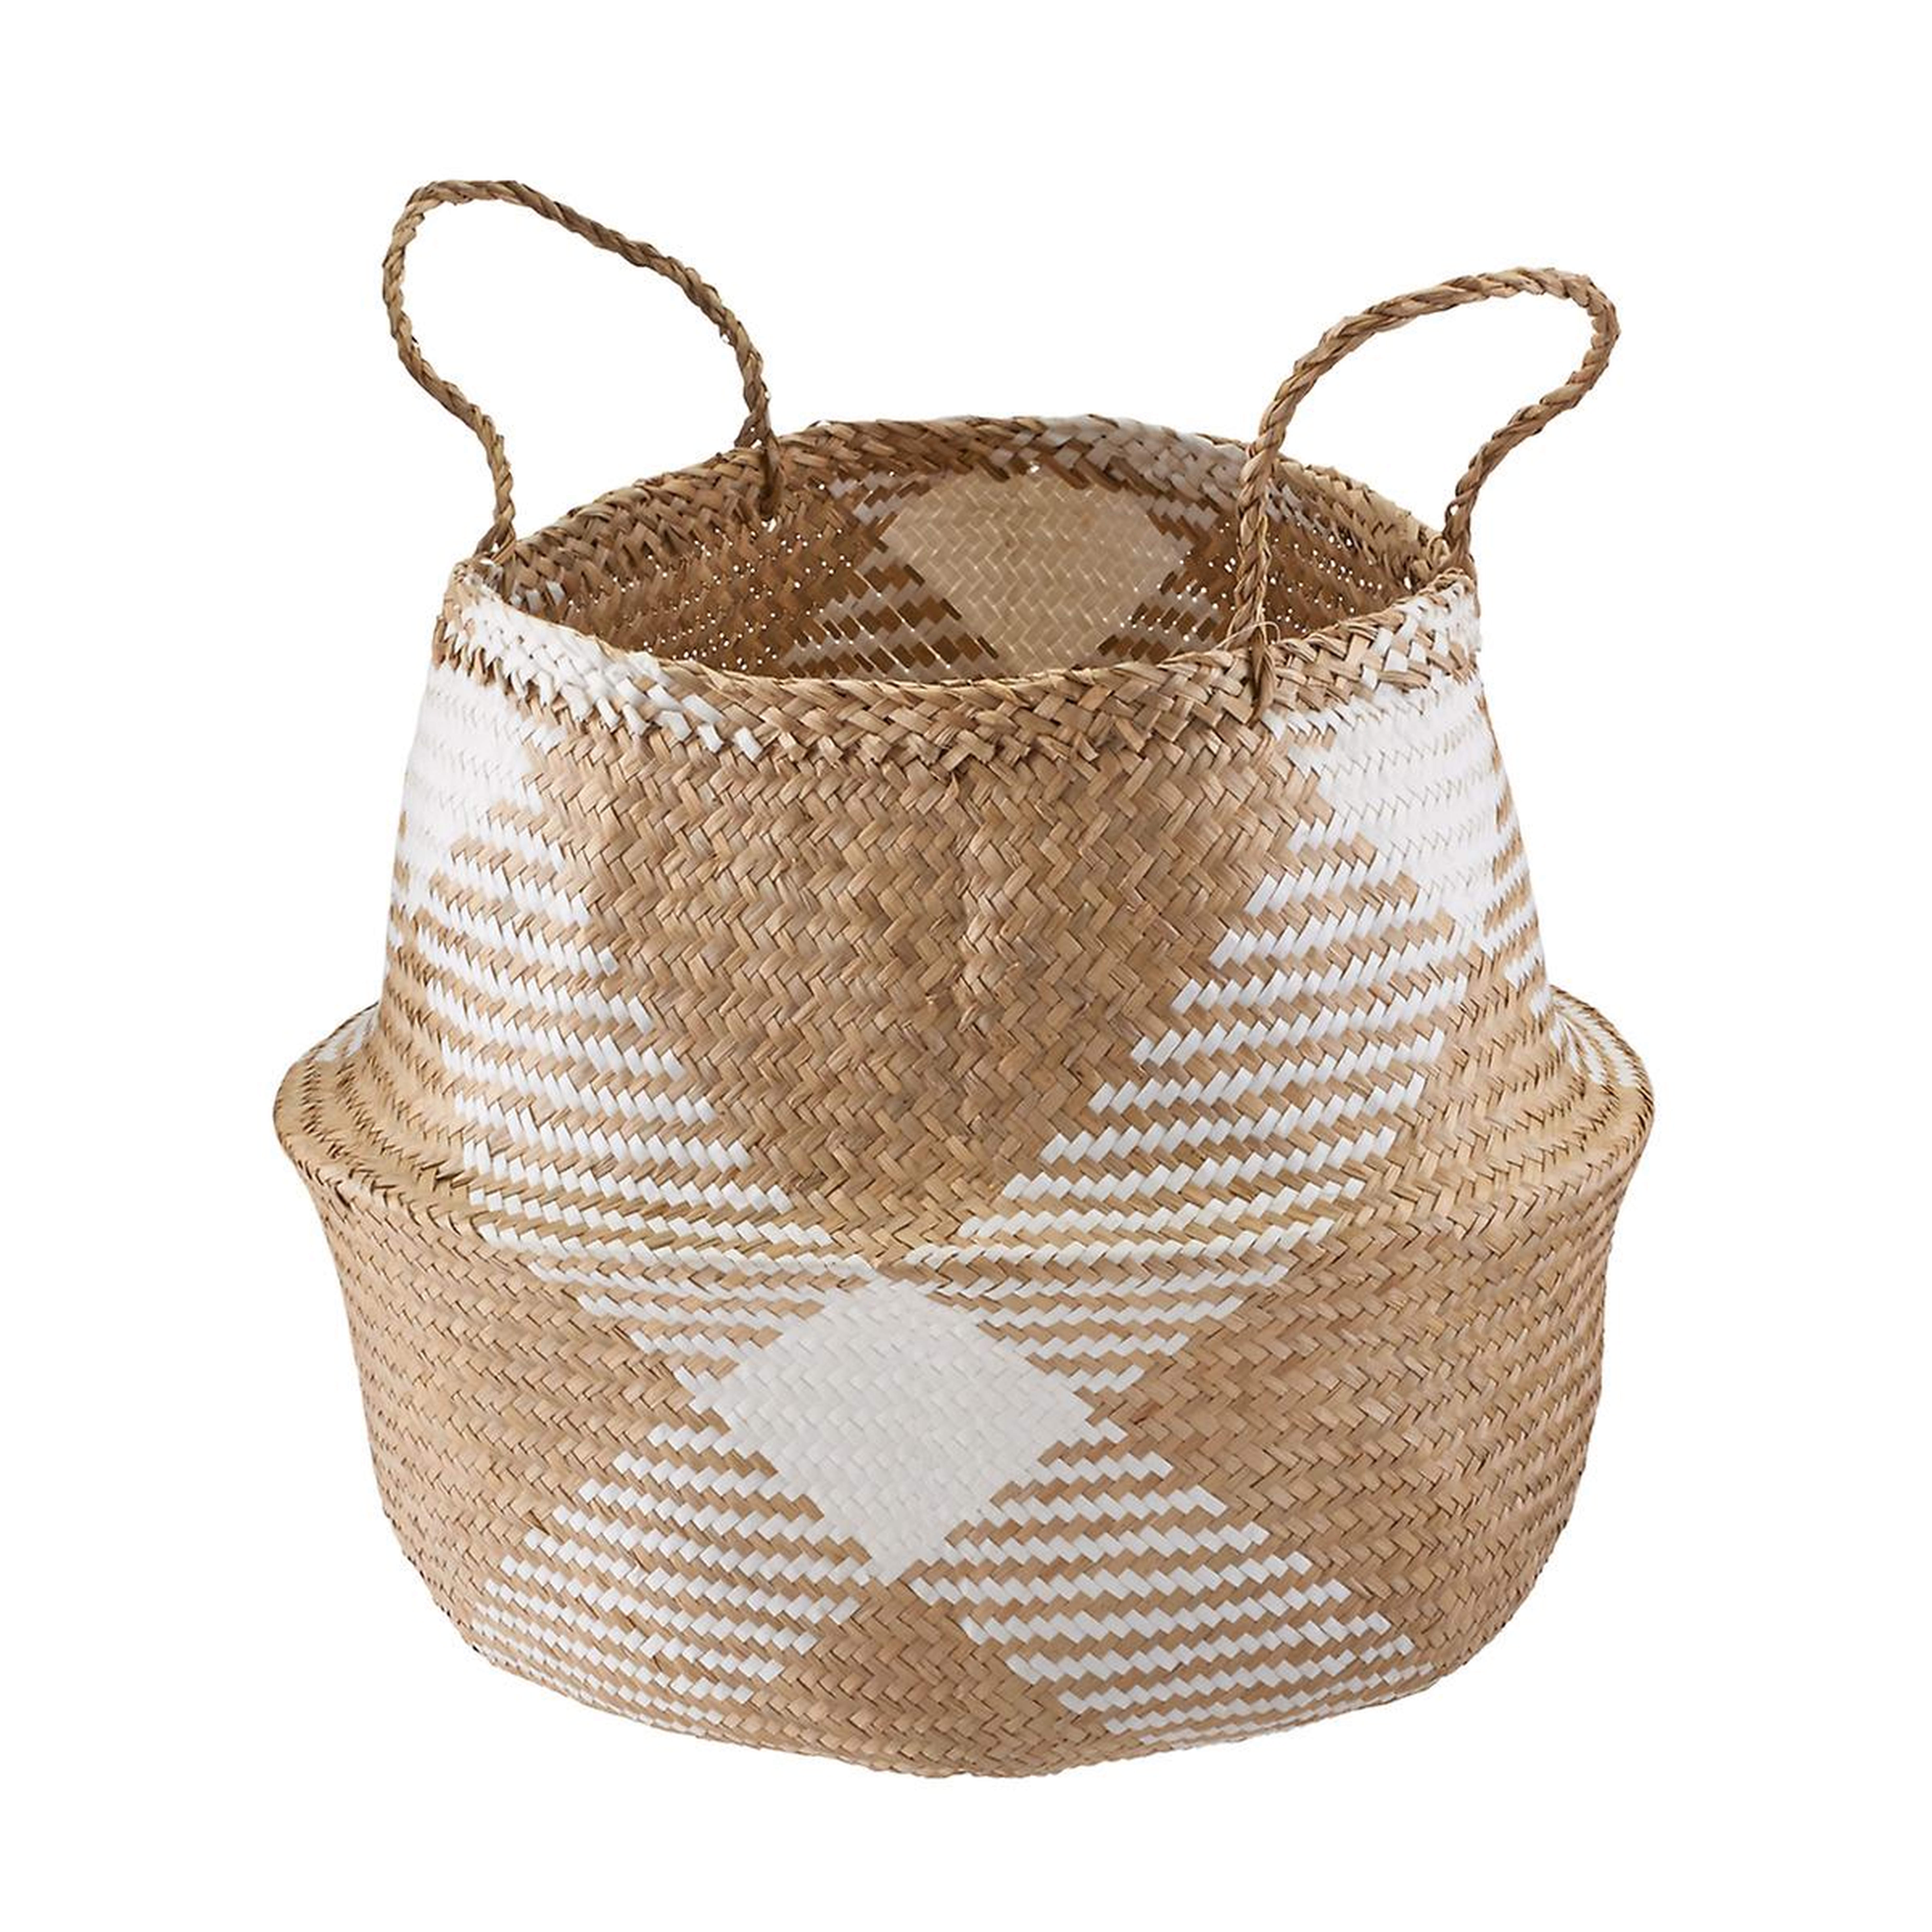 X-Large Diamonds Seagrass Belly Basket - containerstore.com